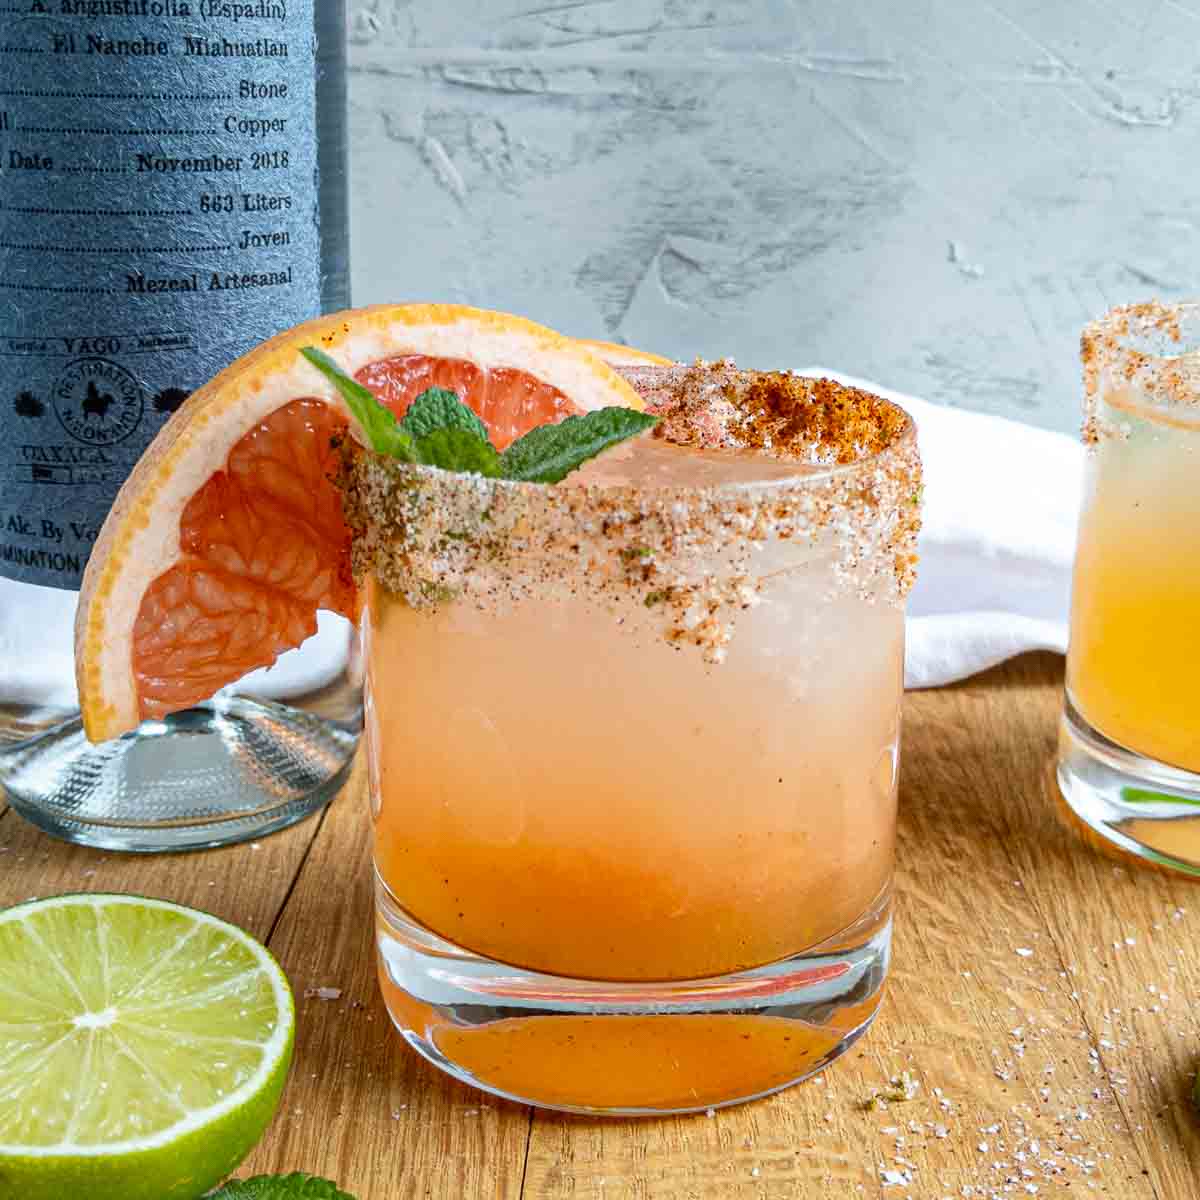 https://www.peelwithzeal.com/wp-content/uploads/2020/04/healthy-mezcal-paloma-cocktail-recipe.jpg